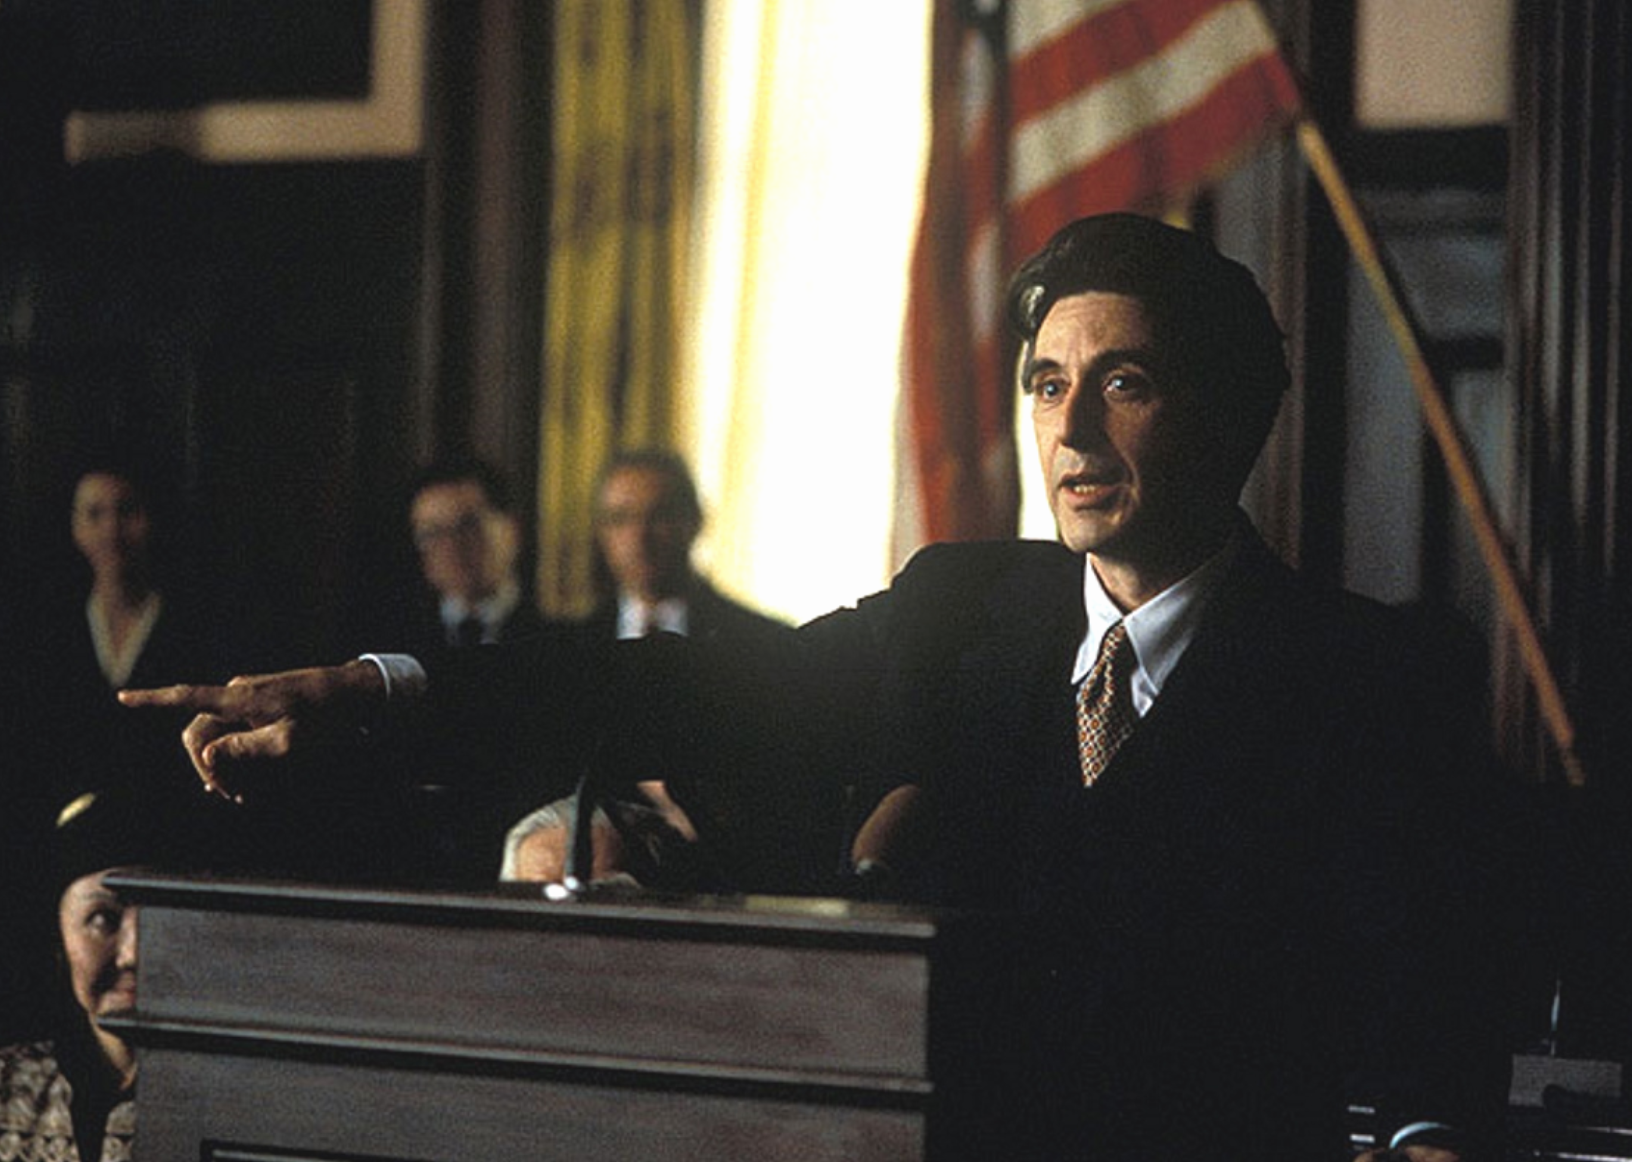 Al Pacino in a scene from 'City Hall’.